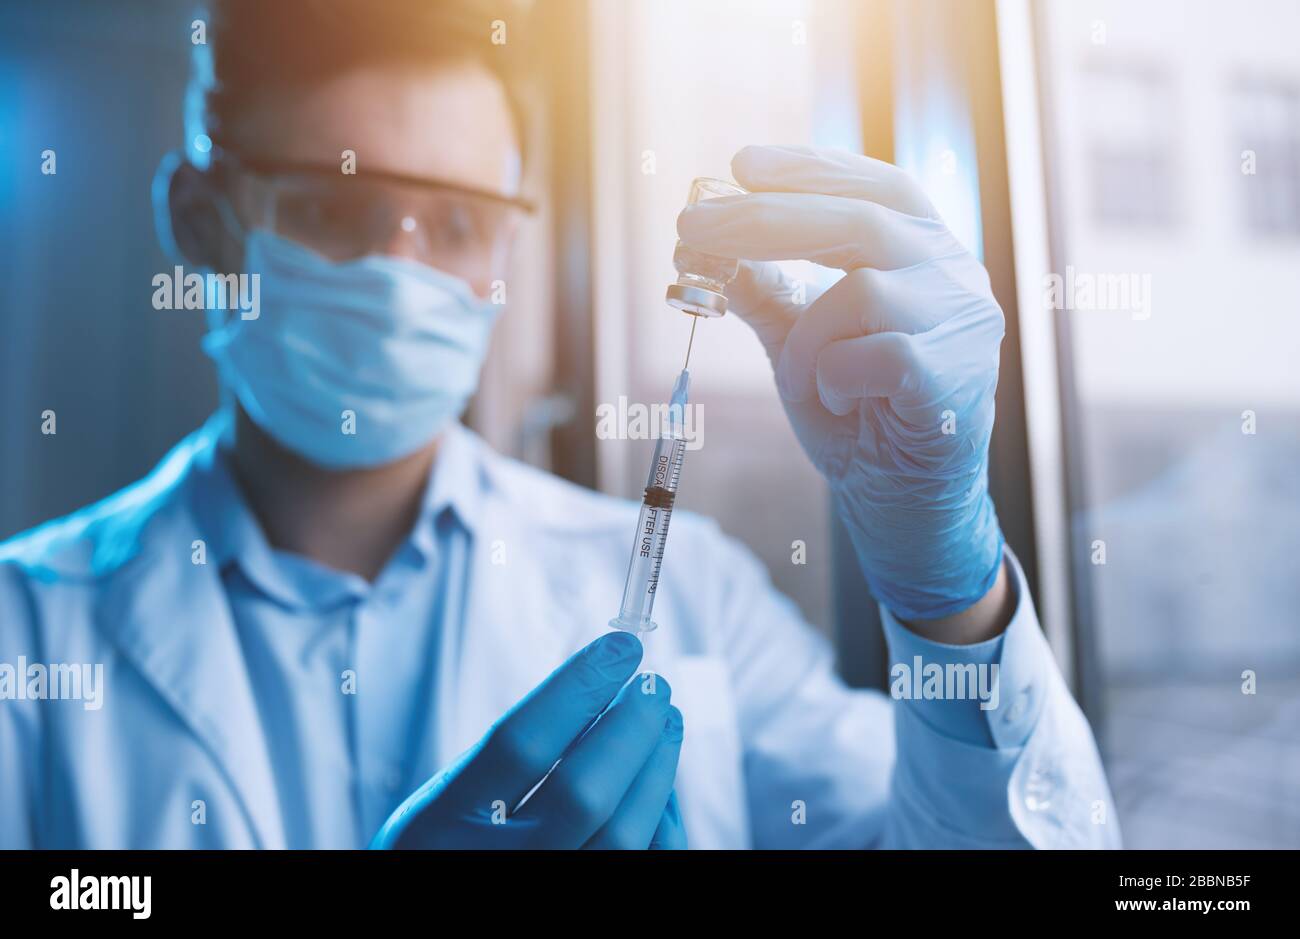 Medic with mask works on a solution for covid 19 virus. Concept of medical research Stock Photo